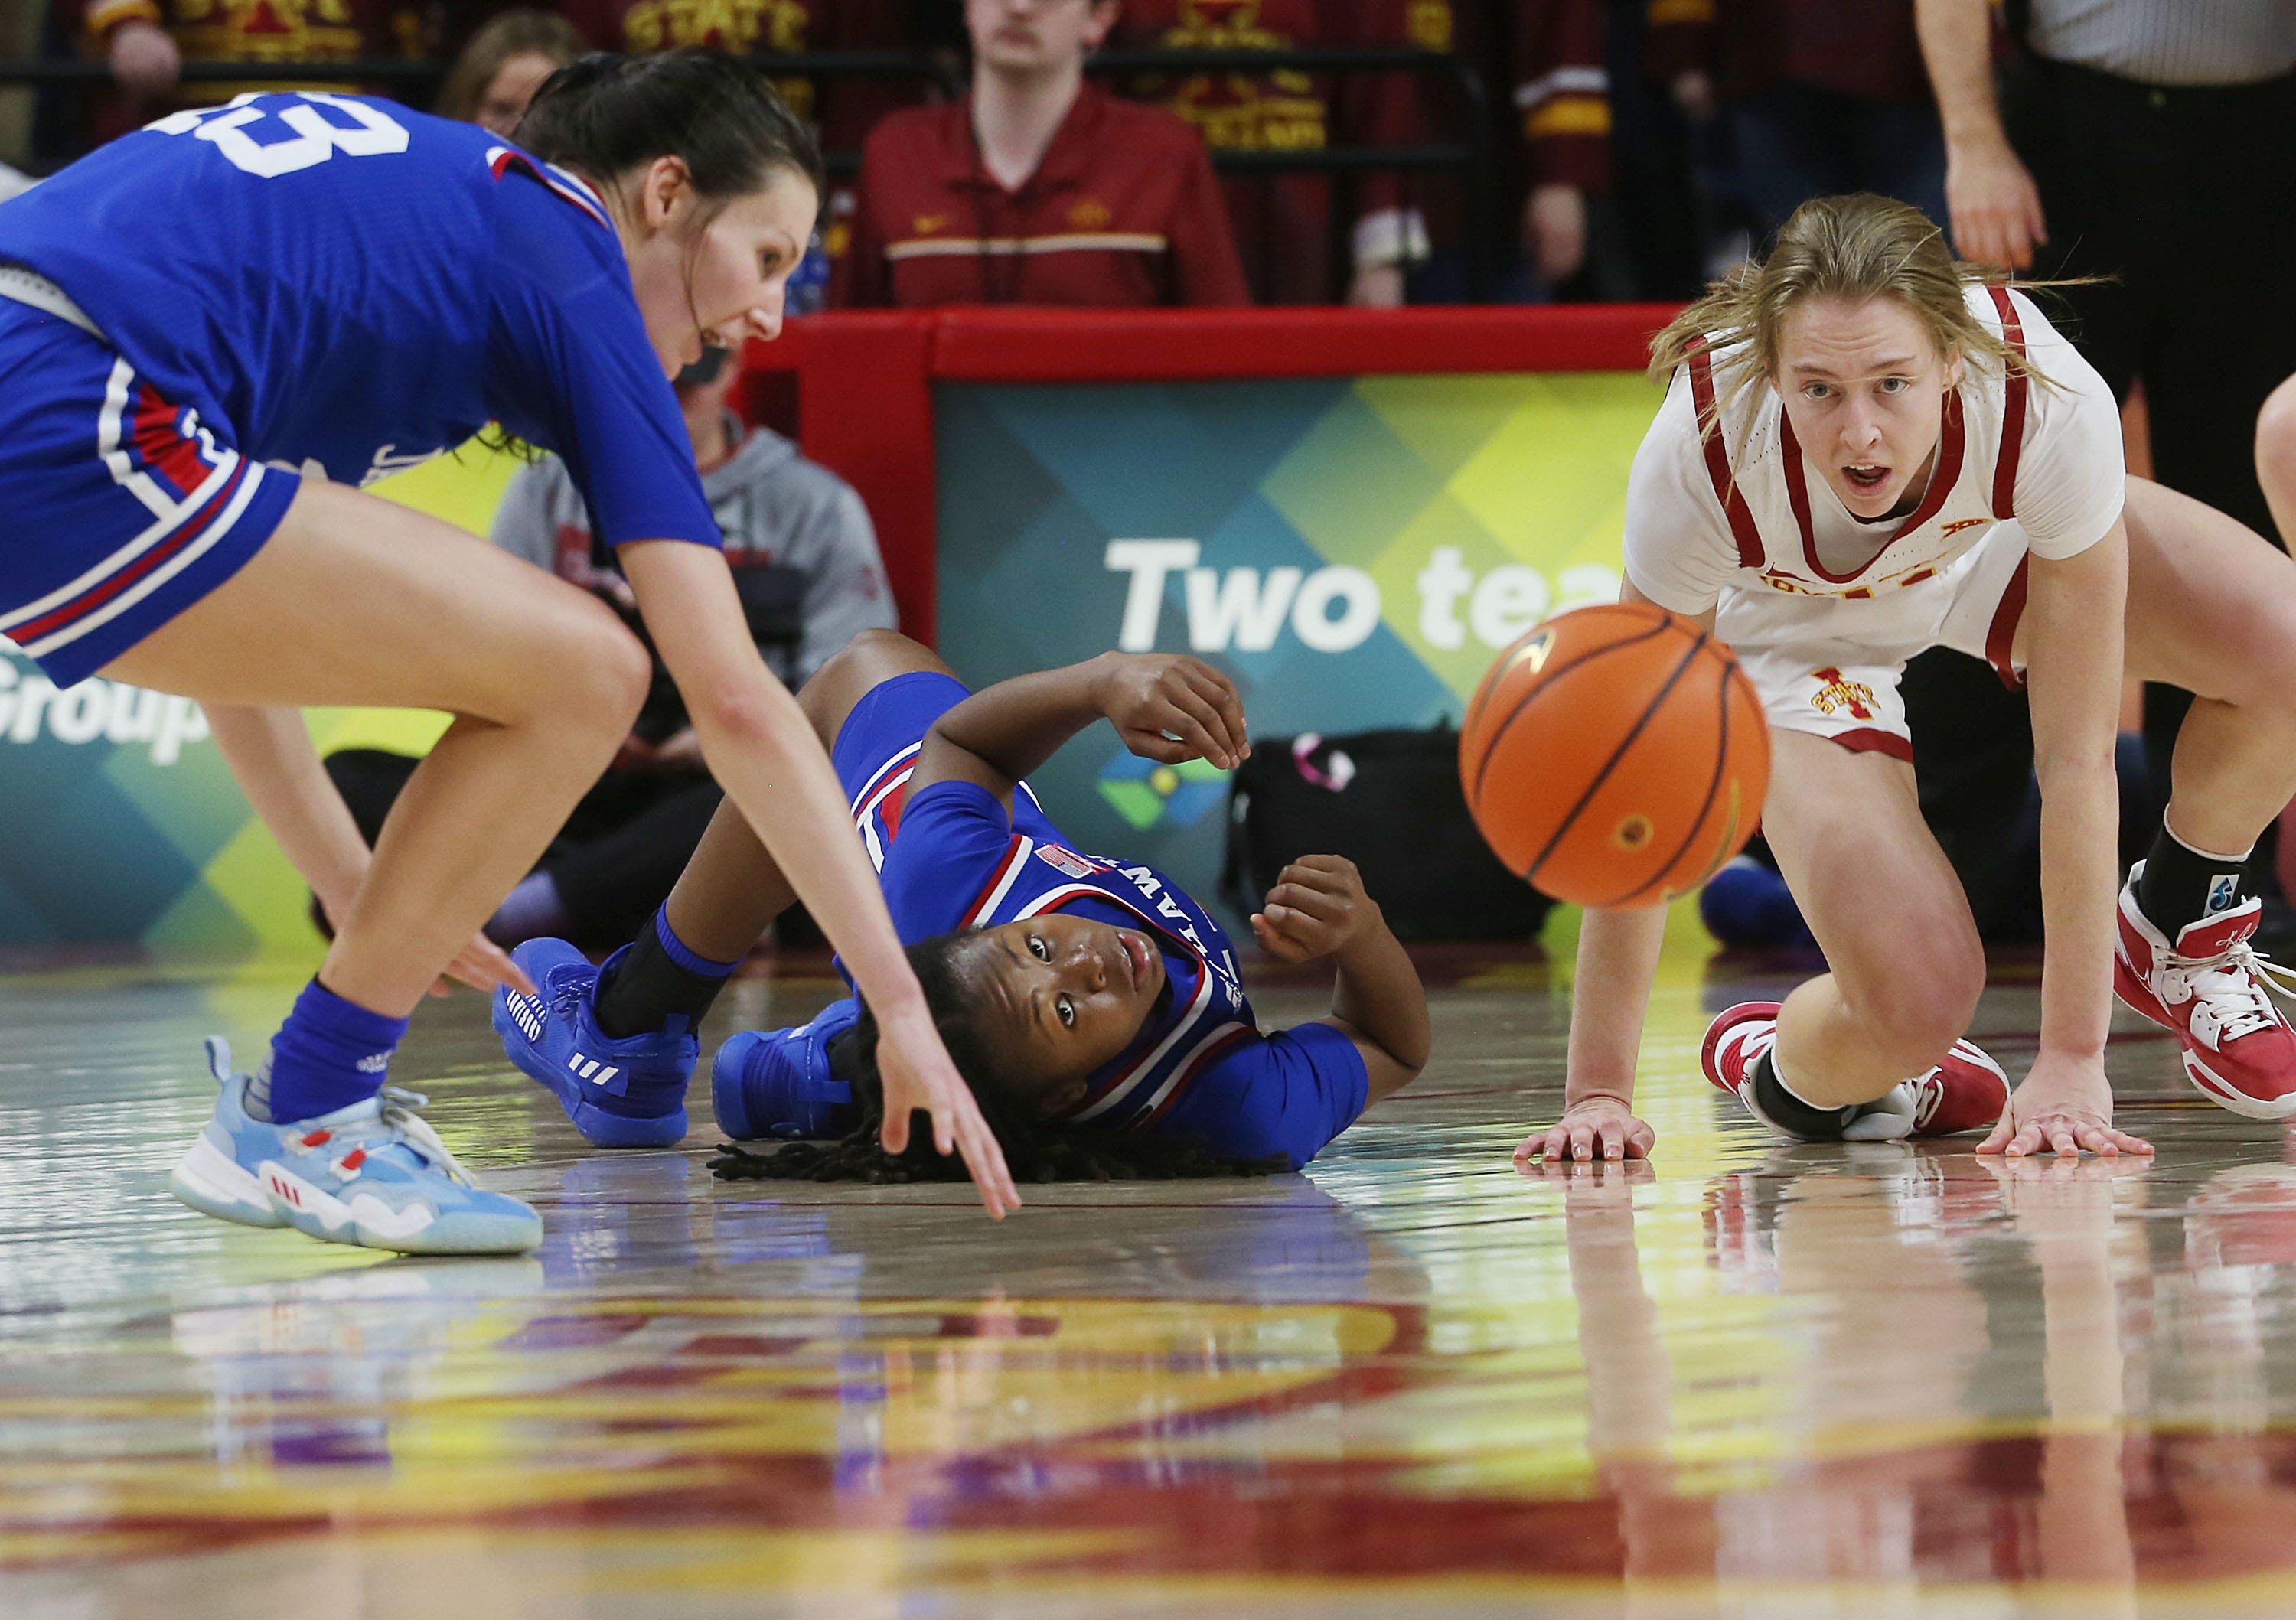 Offense stalls as Jayhawks fall at Cyclones, 64-50